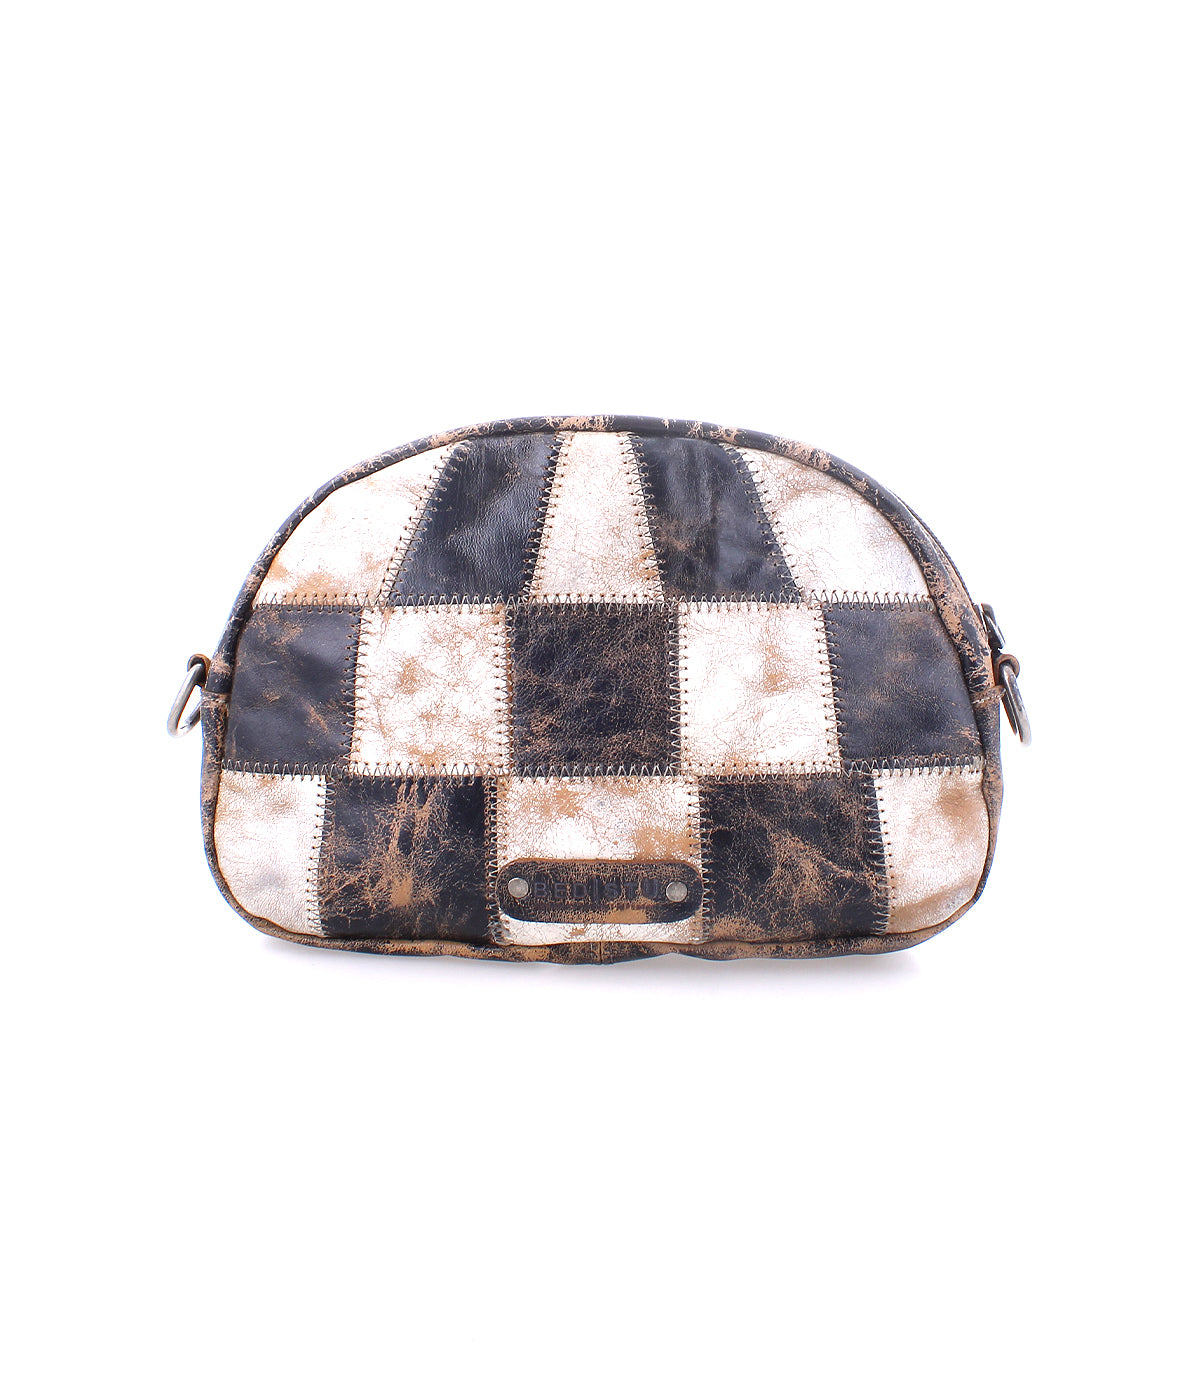 A Bed Stu Abundance patchwork leather cosmetic bag with a zipper, featuring a checkered pattern of black and tan squares, isolated on a white background.